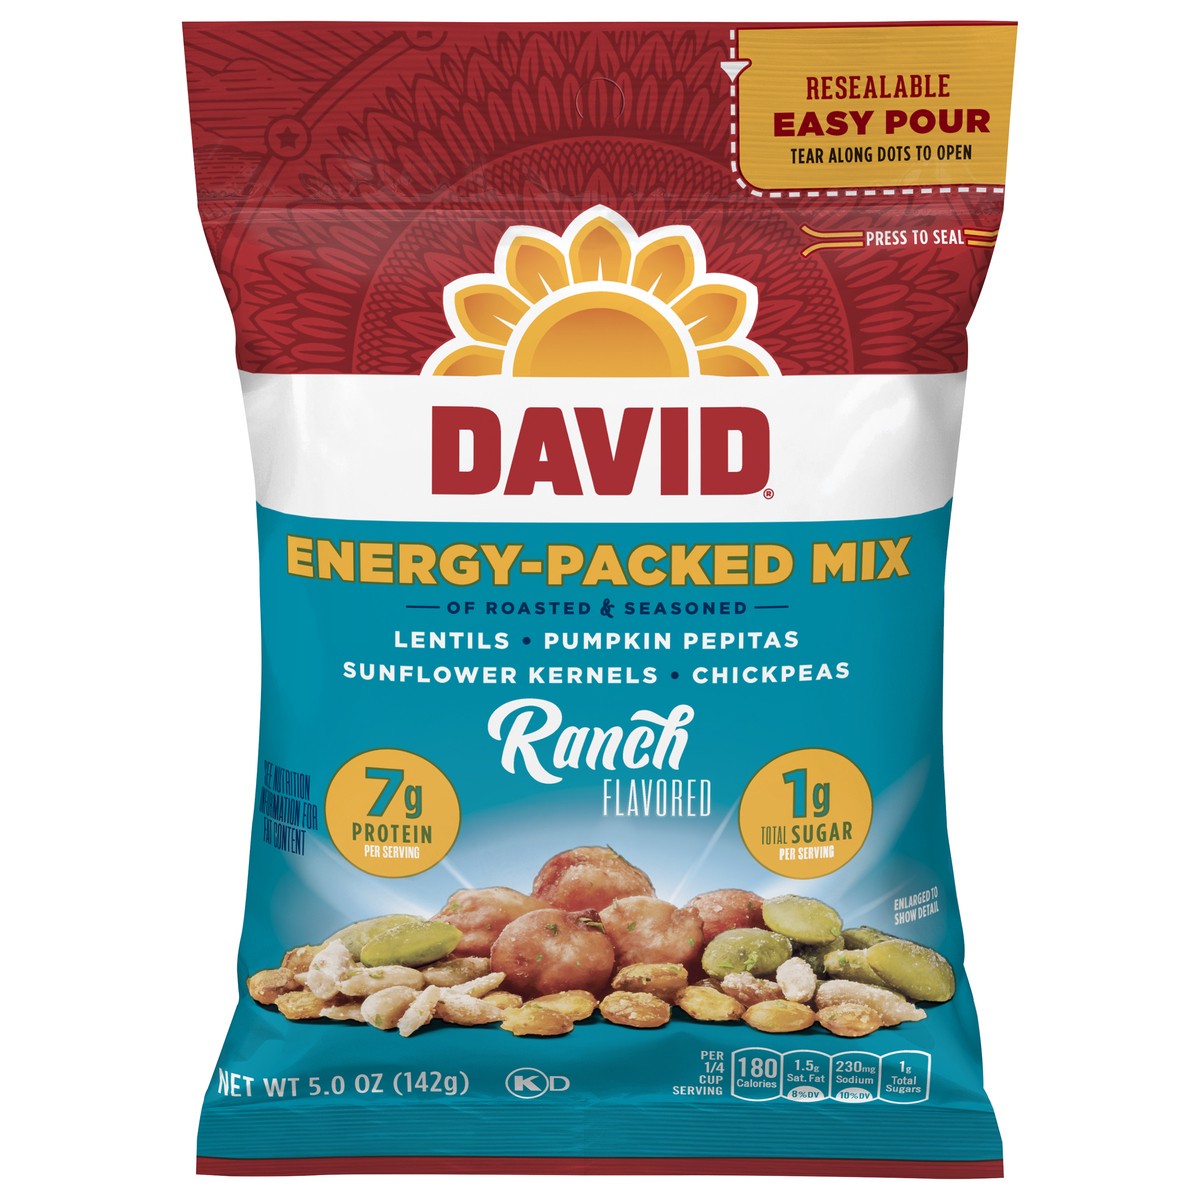 slide 6 of 6, DAVID Ranch Flavored Energy-Packed Mix 5.0 oz, 5 oz